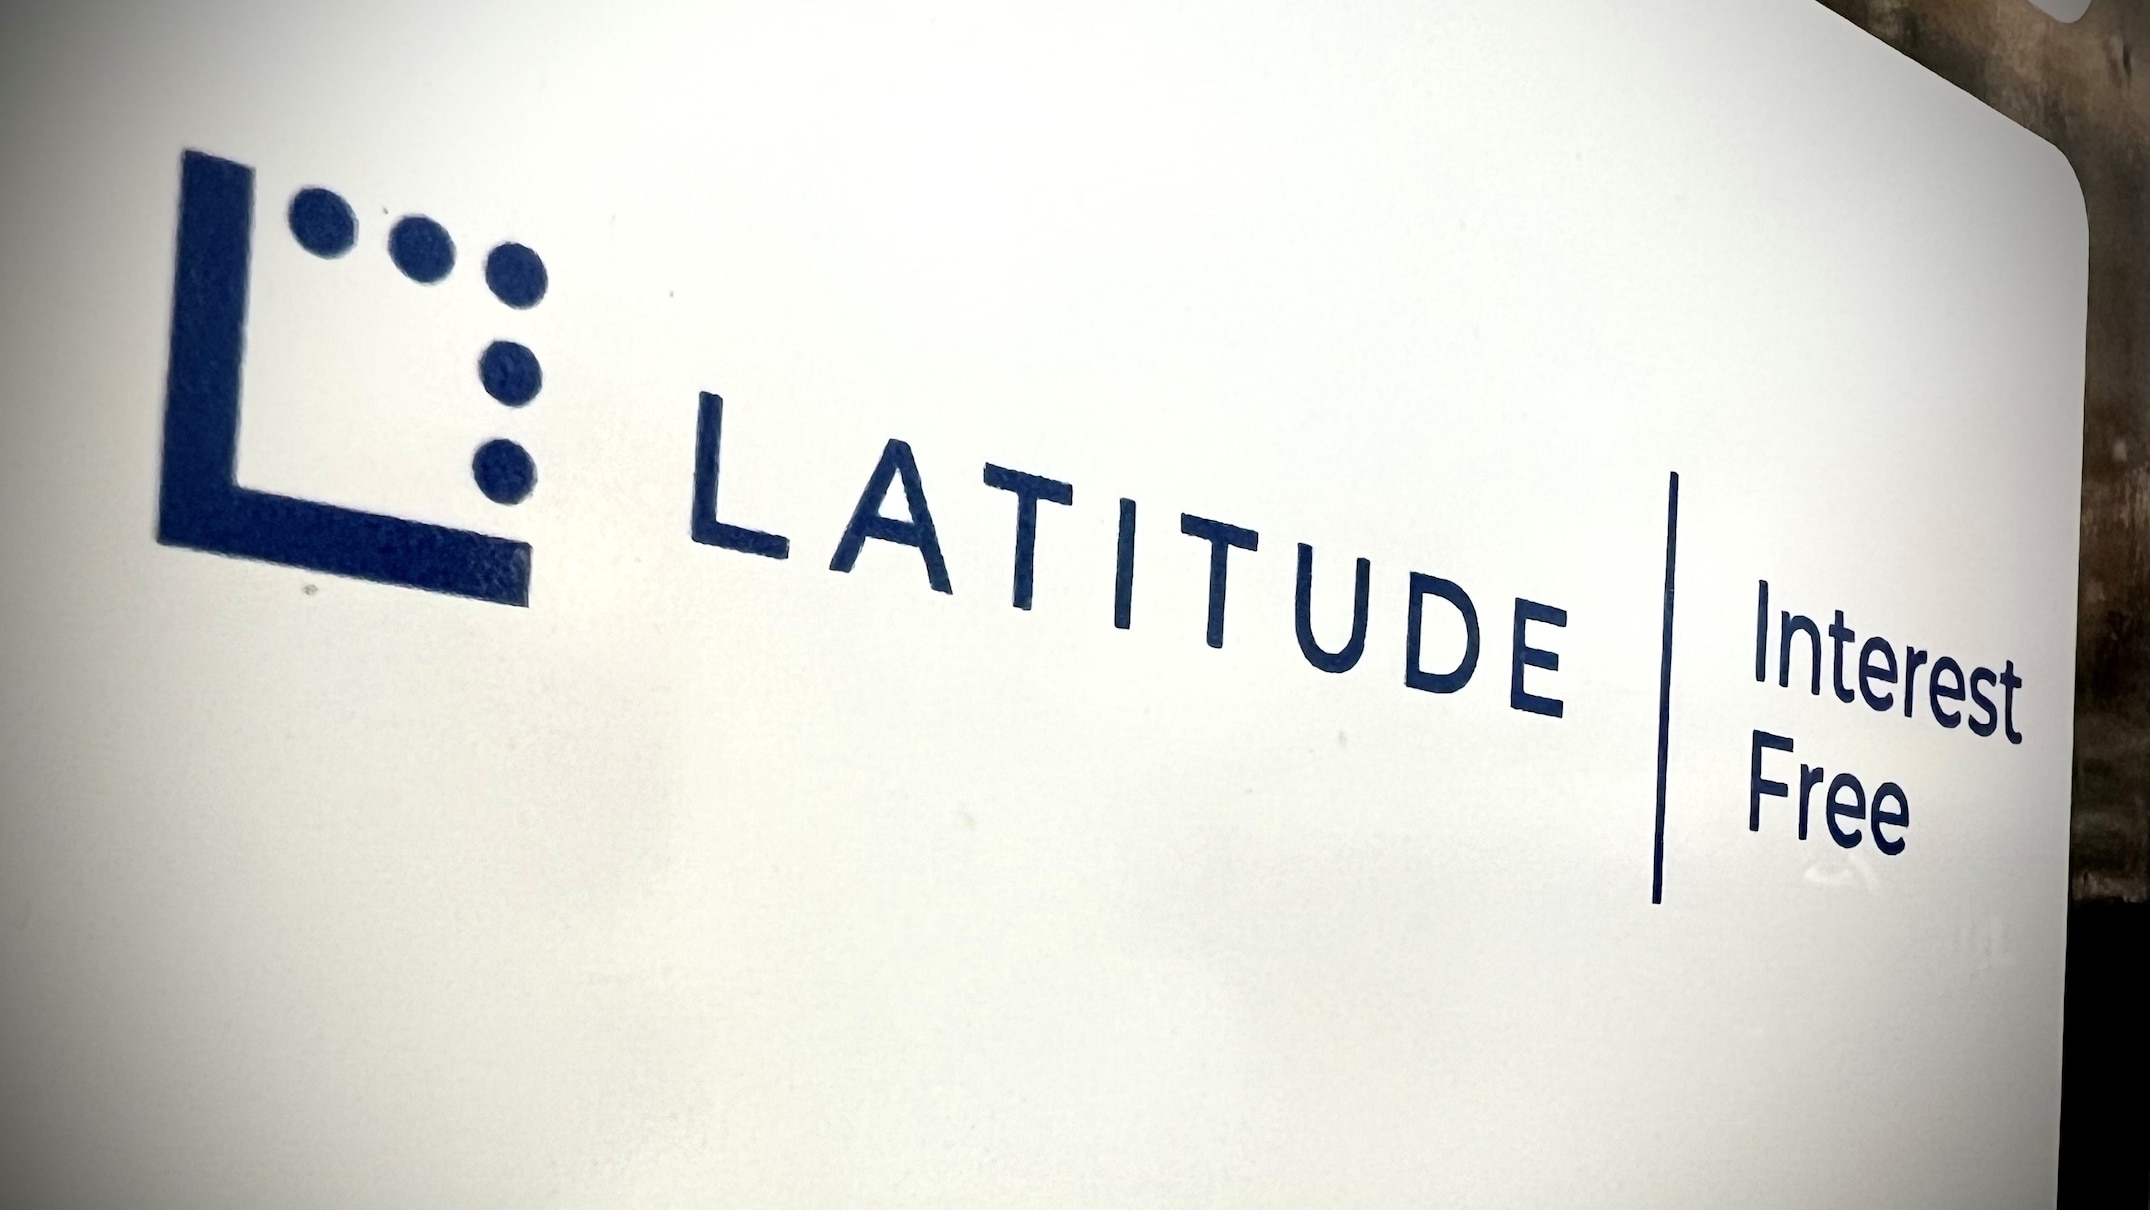 Latitude Financial is thought to be one of the first examples in Australia of a major data breach on a financial services company. (ABC News: John Gunn)